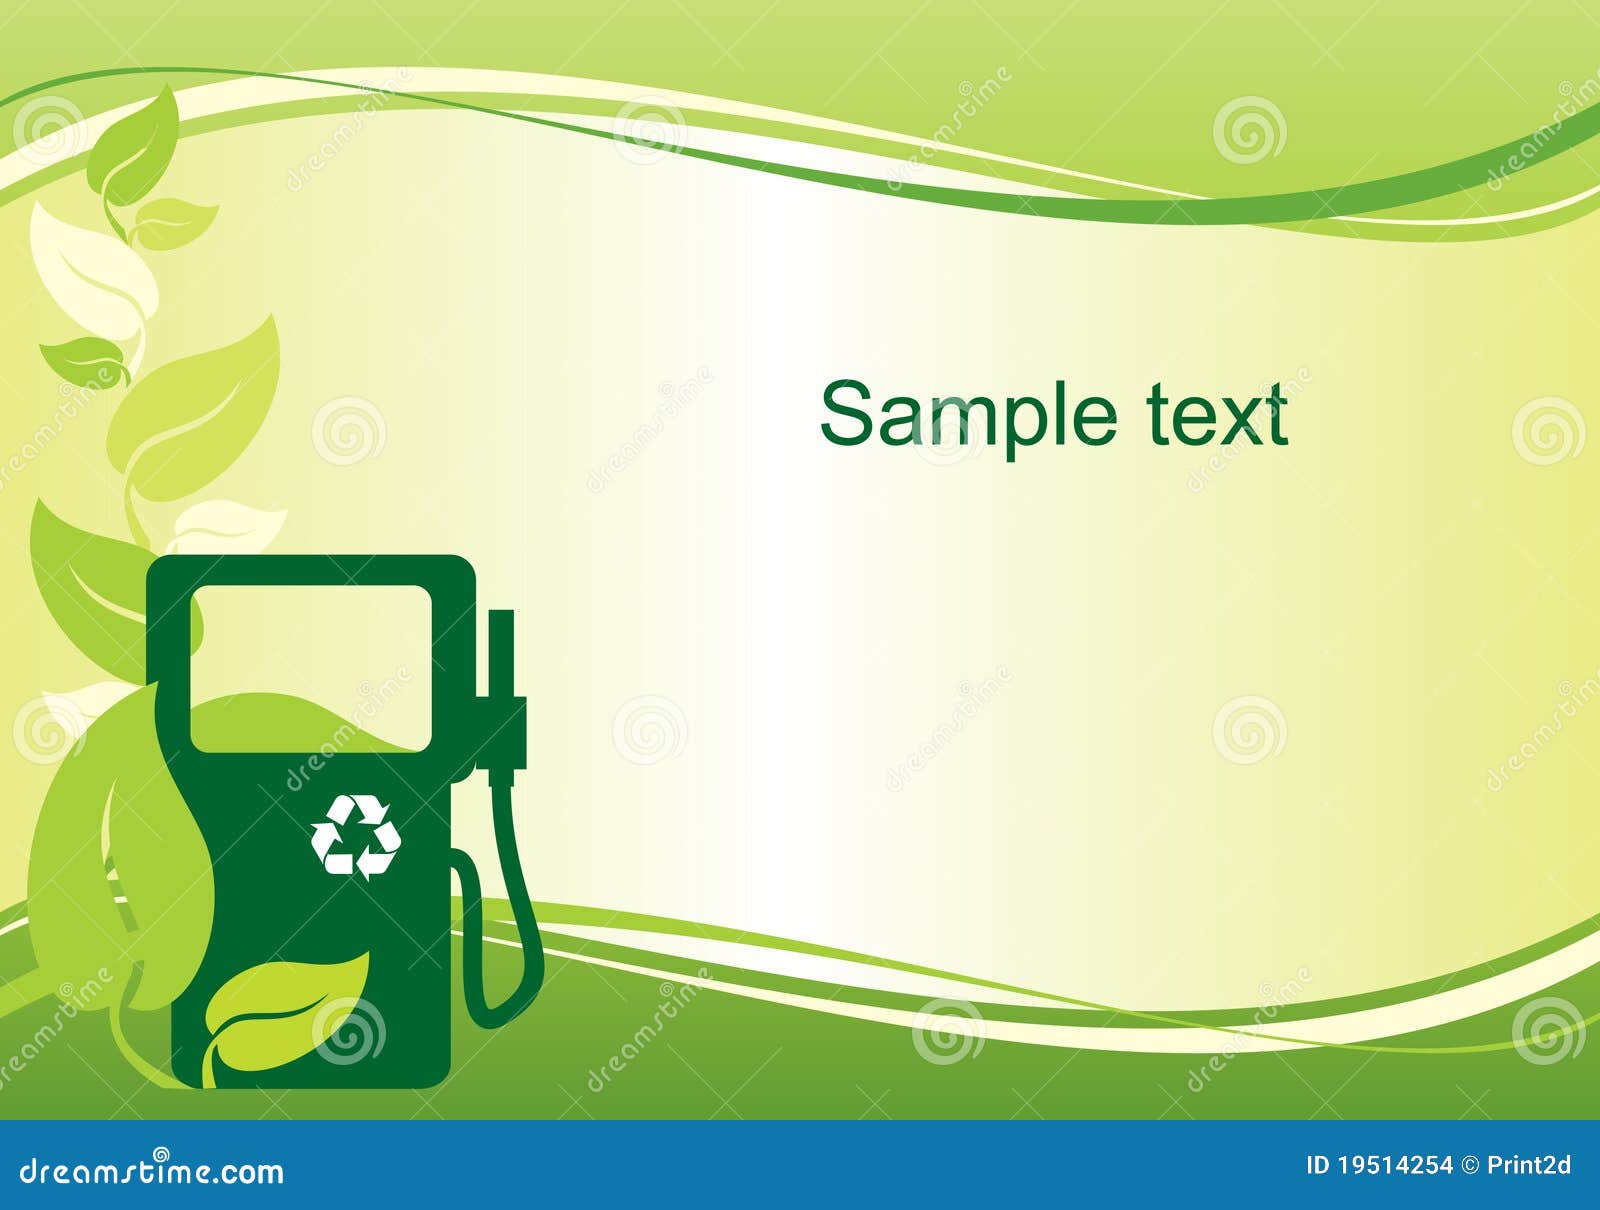 Biofuel background stock vector. Illustration of template ...